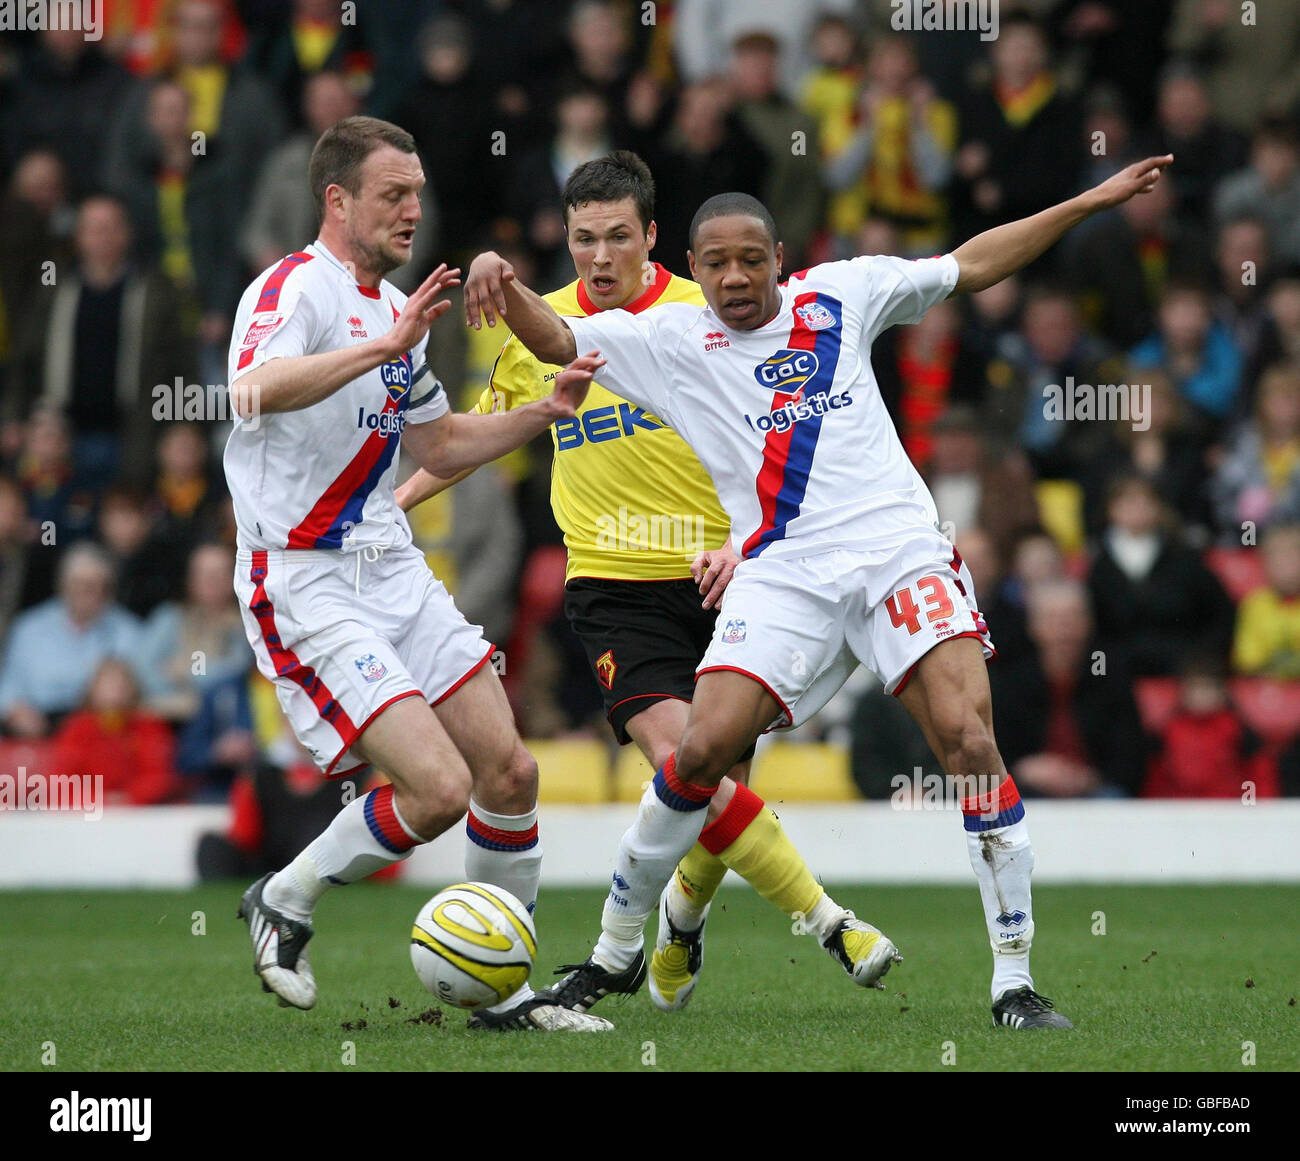 Watford's Don Cowie is stopped by Crystal Palace's Nathan Clyne (right) and Clint Hill during the Coca-Cola Championship match at Vicarage Road, Watford. Stock Photo